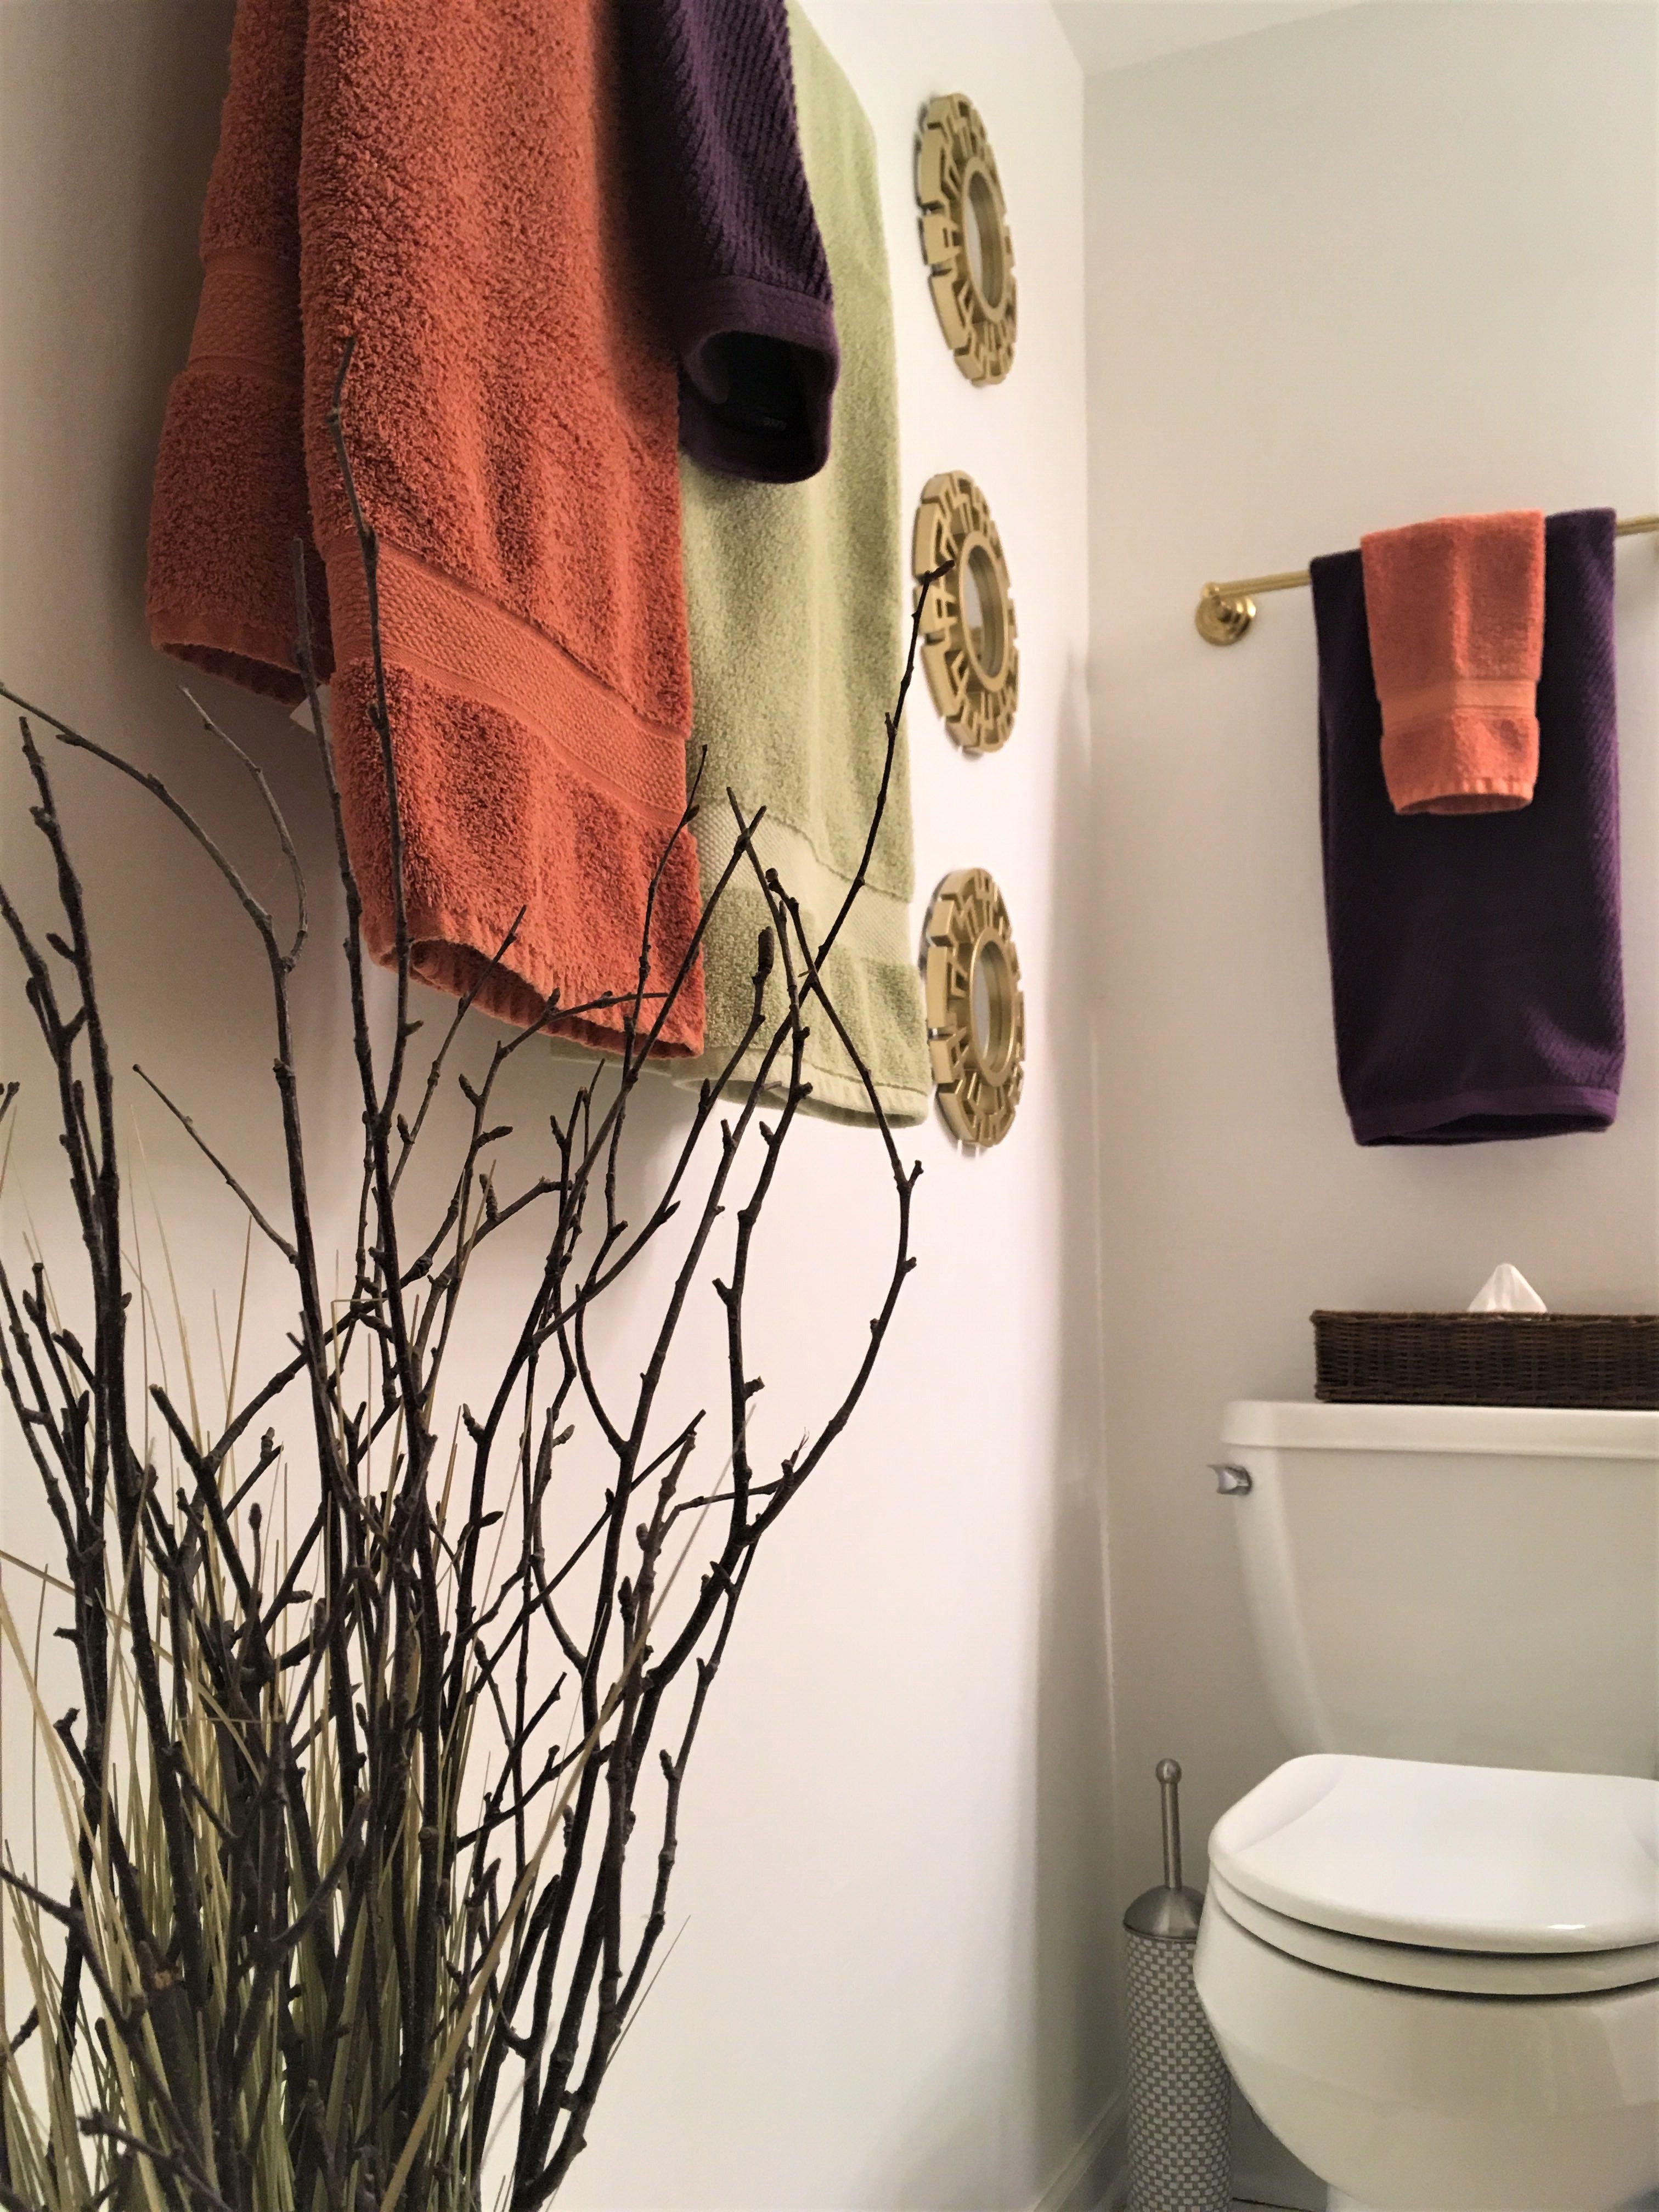 Ideas on how you can decorate your bathroom for the fall season.